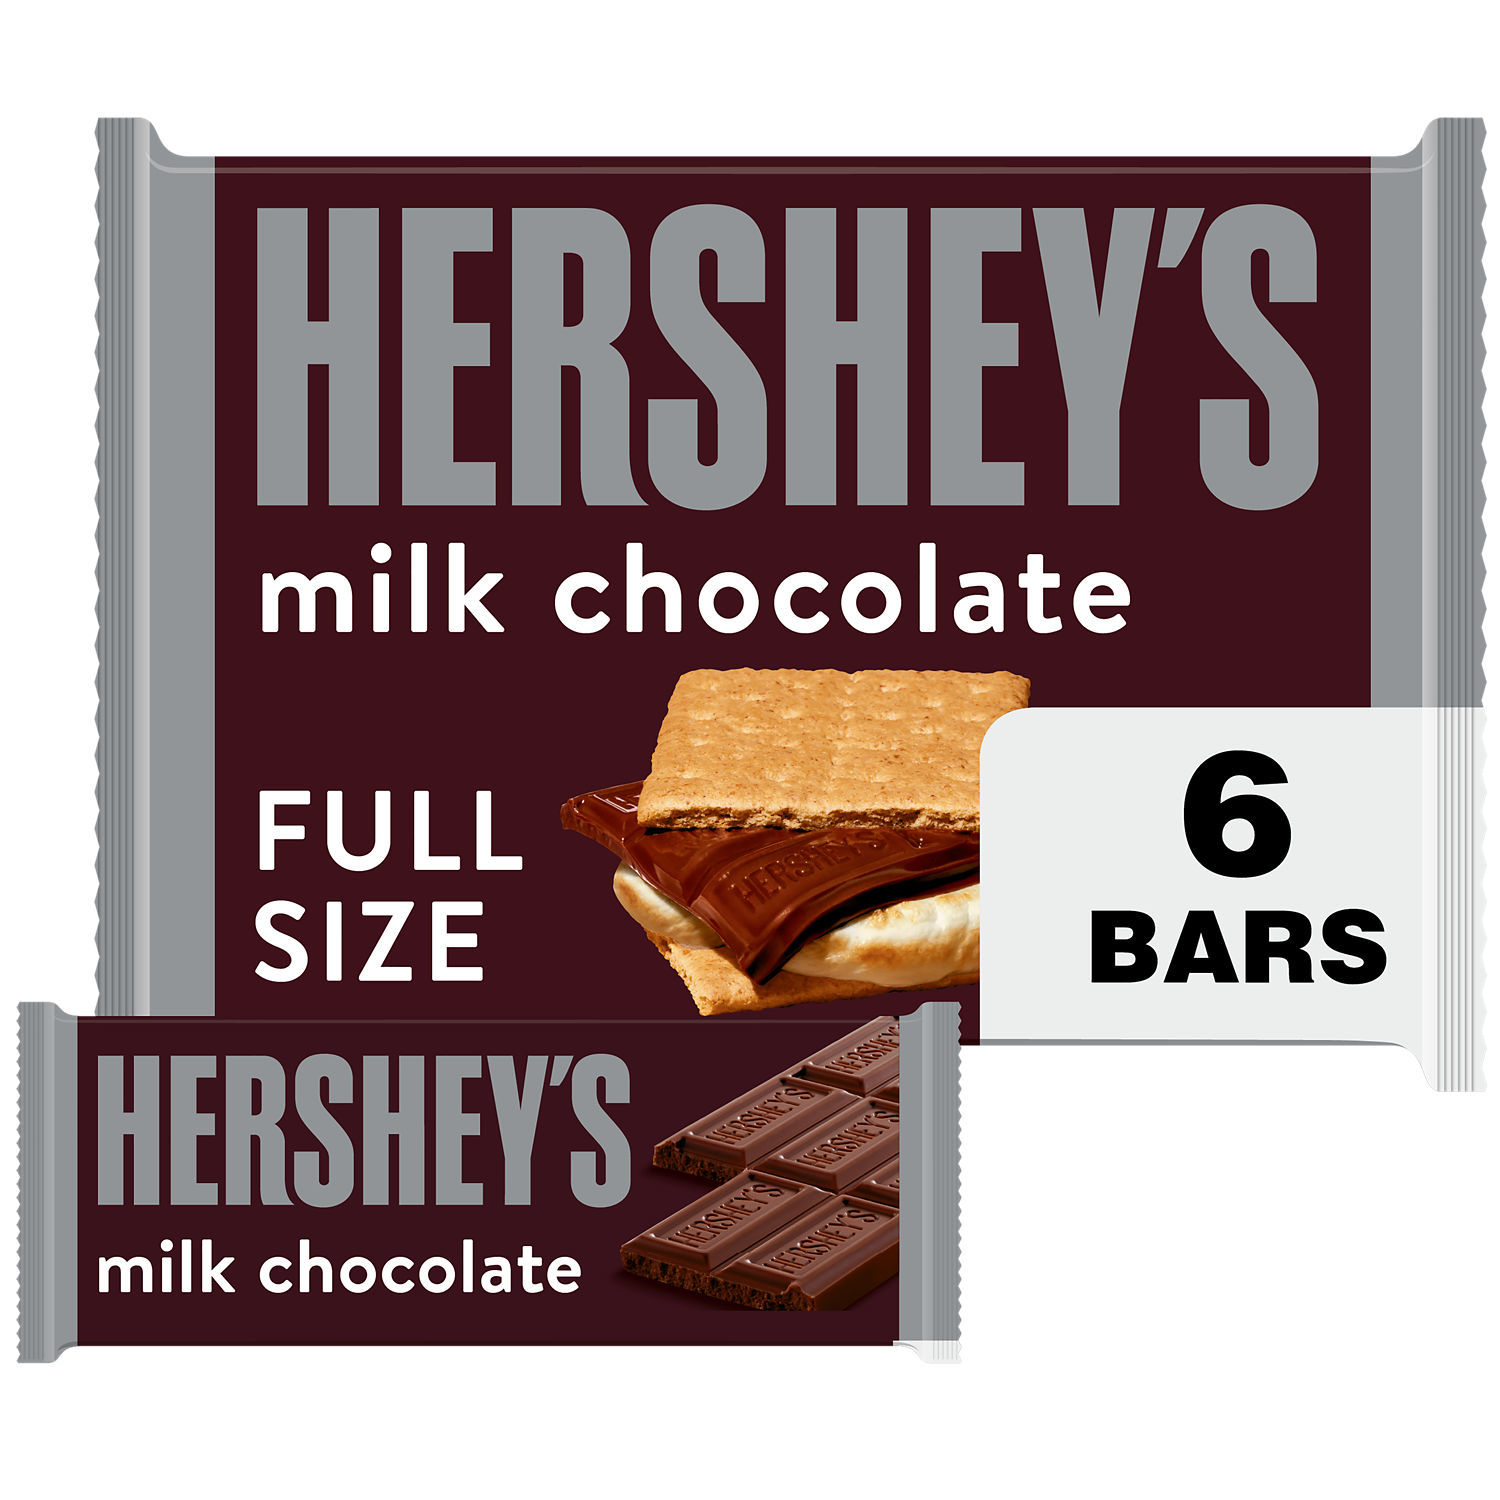 Hershey's Milk Chocolate Candy, Bars 1.55 oz, 6 Count - image 1 of 9